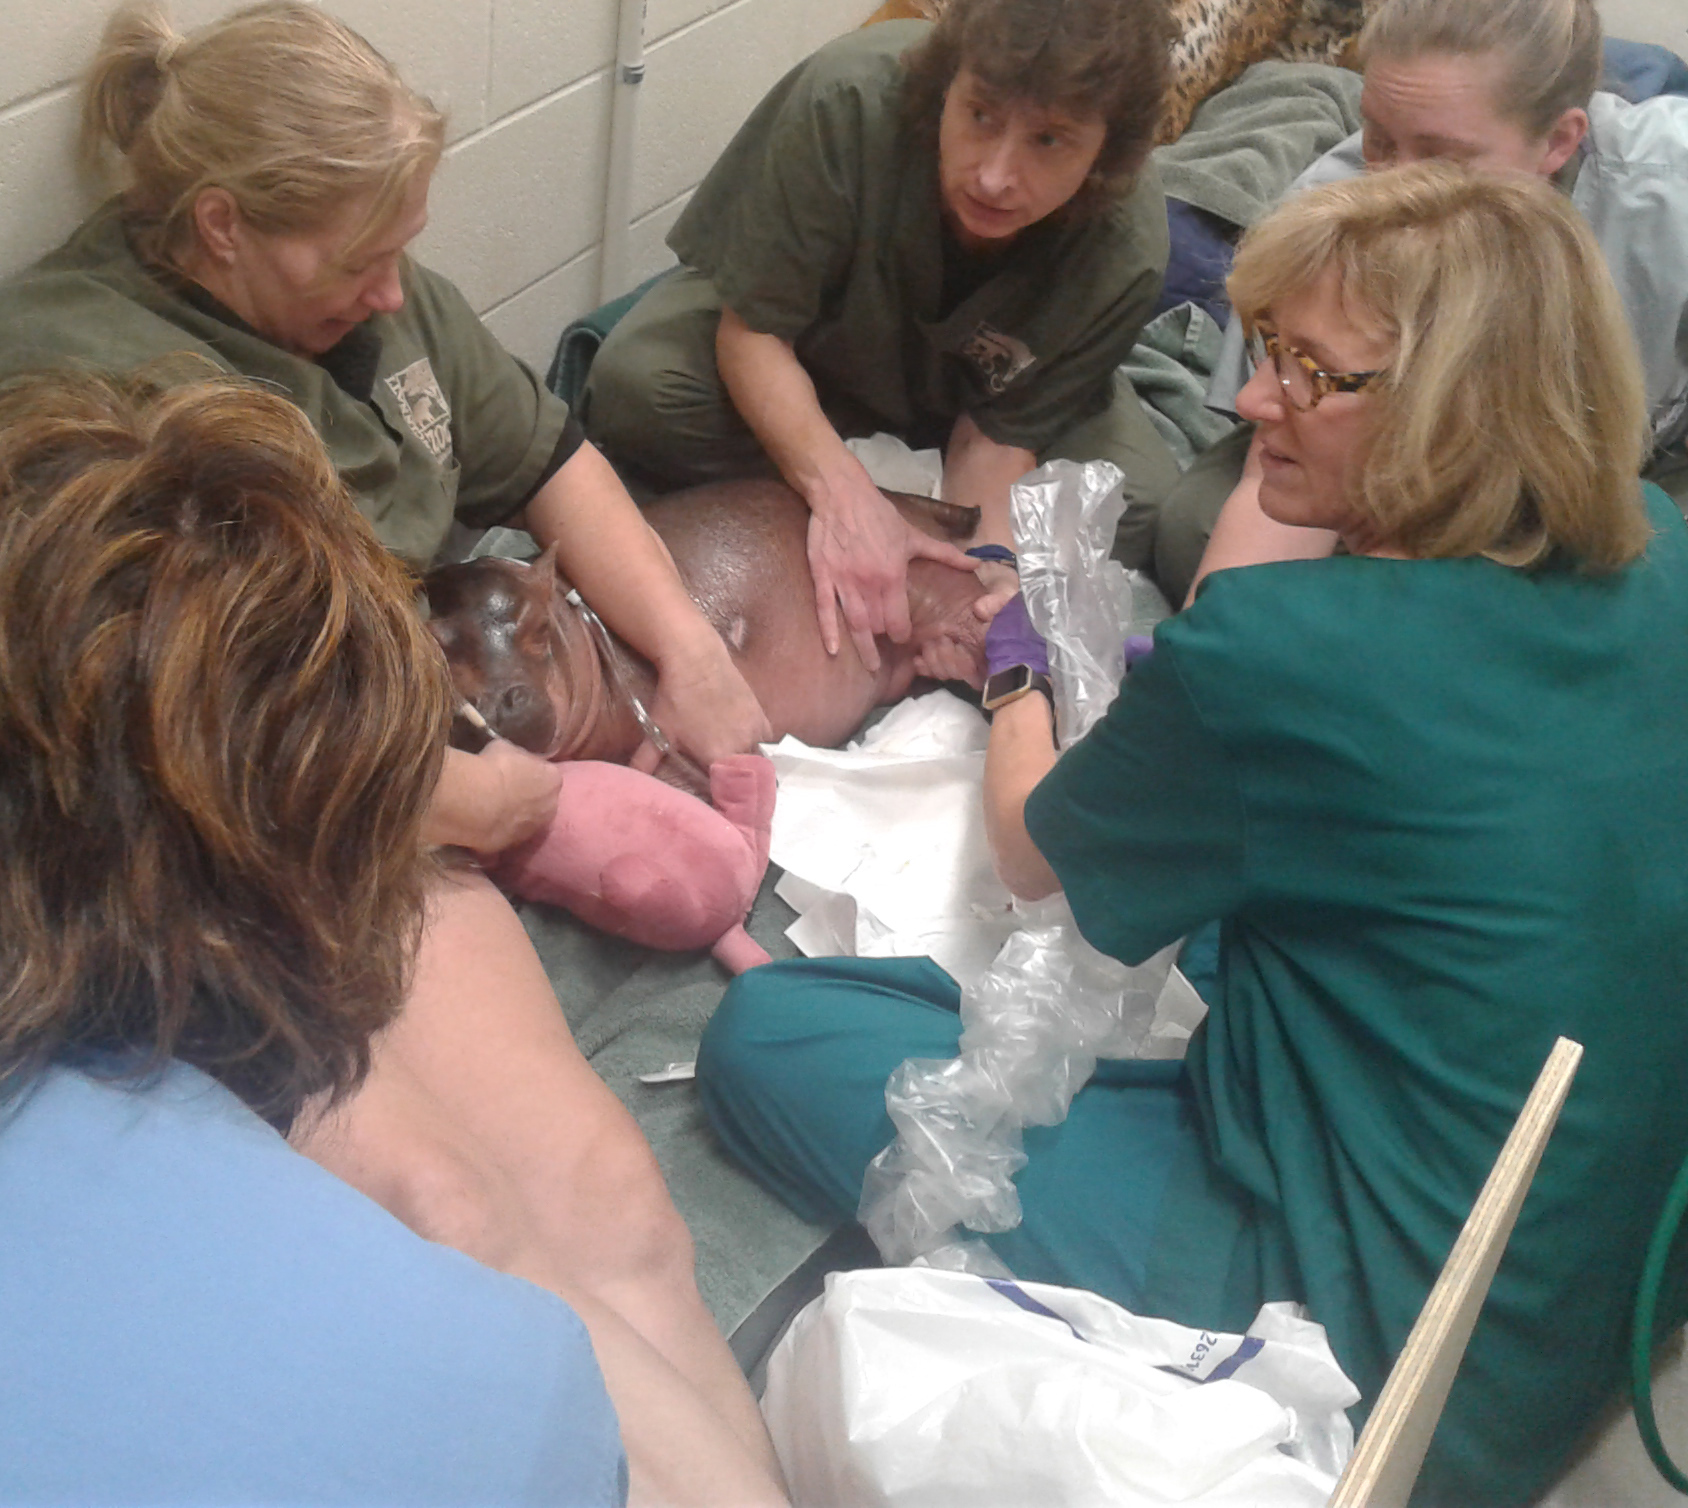 Nurses surrounding Fiona to help put in an IV for fluids